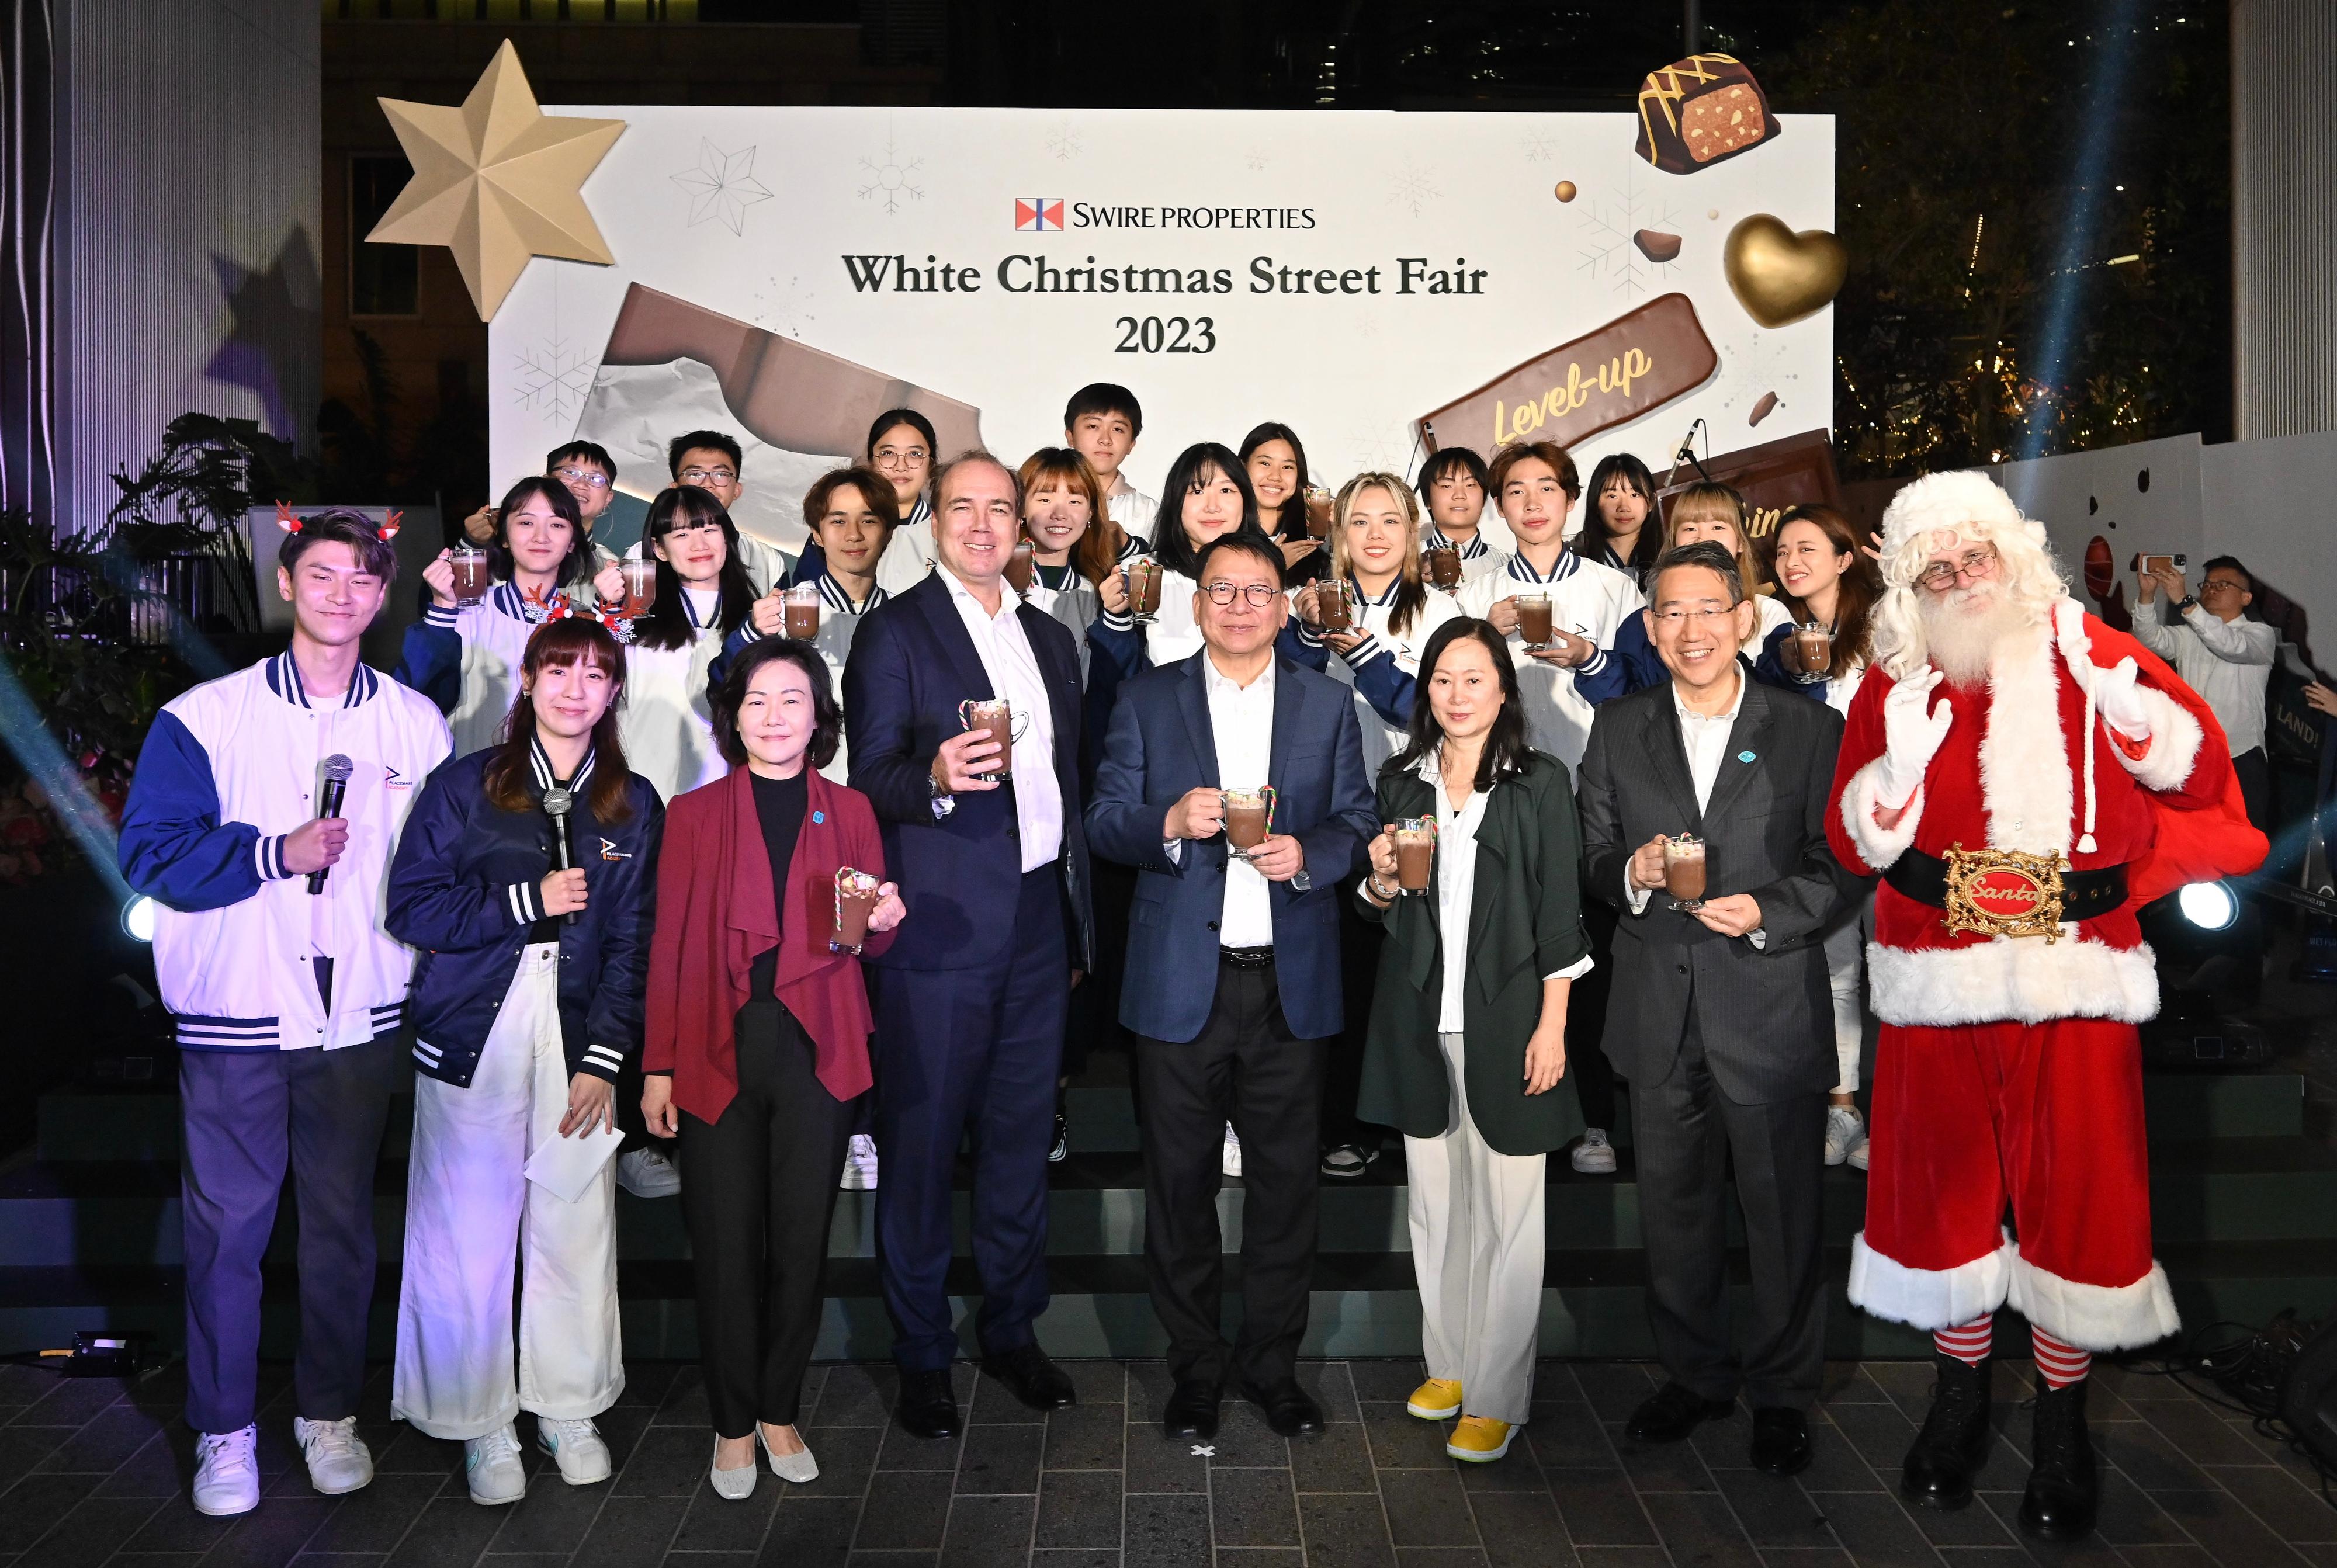 The Chief Secretary for Administration, Mr Chan Kwok-ki, attended the Opening Ceremony of the White Christmas Street Fair 2023 today (November 30). Photo shows (first row, from third left) the Director of Home Affairs, Mrs Alice Cheung; the Chief Executive of Swire Properties, Mr Tim Blackburn; Mr Chan; the Editor-in-Chief of the South China Morning Post, Ms Tammy Tam; the District Officer (Eastern), Mr Simon Chan; and other guests at the ceremony.